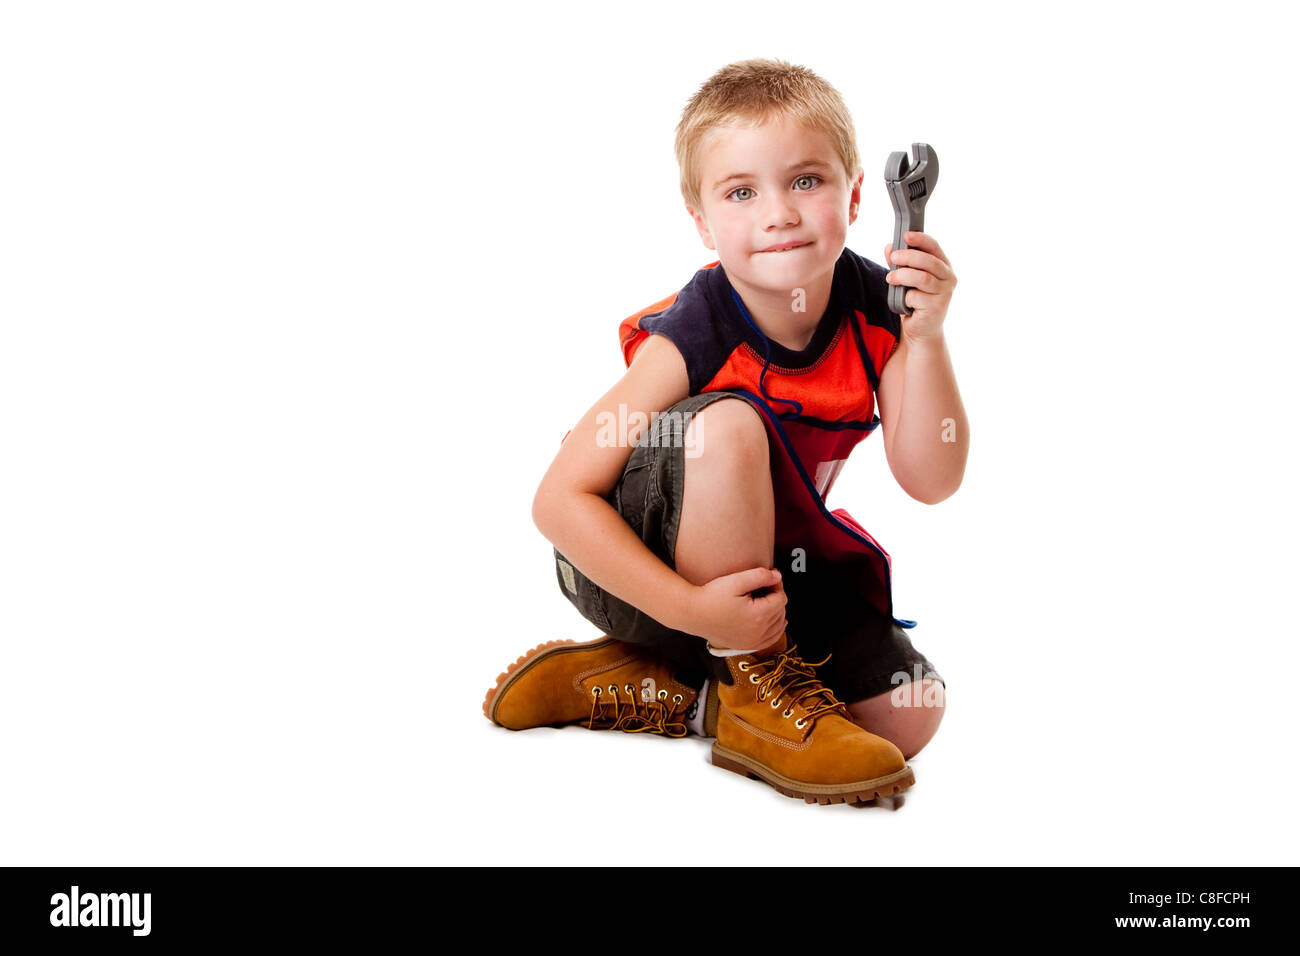 Boy with wrench Stock Photo